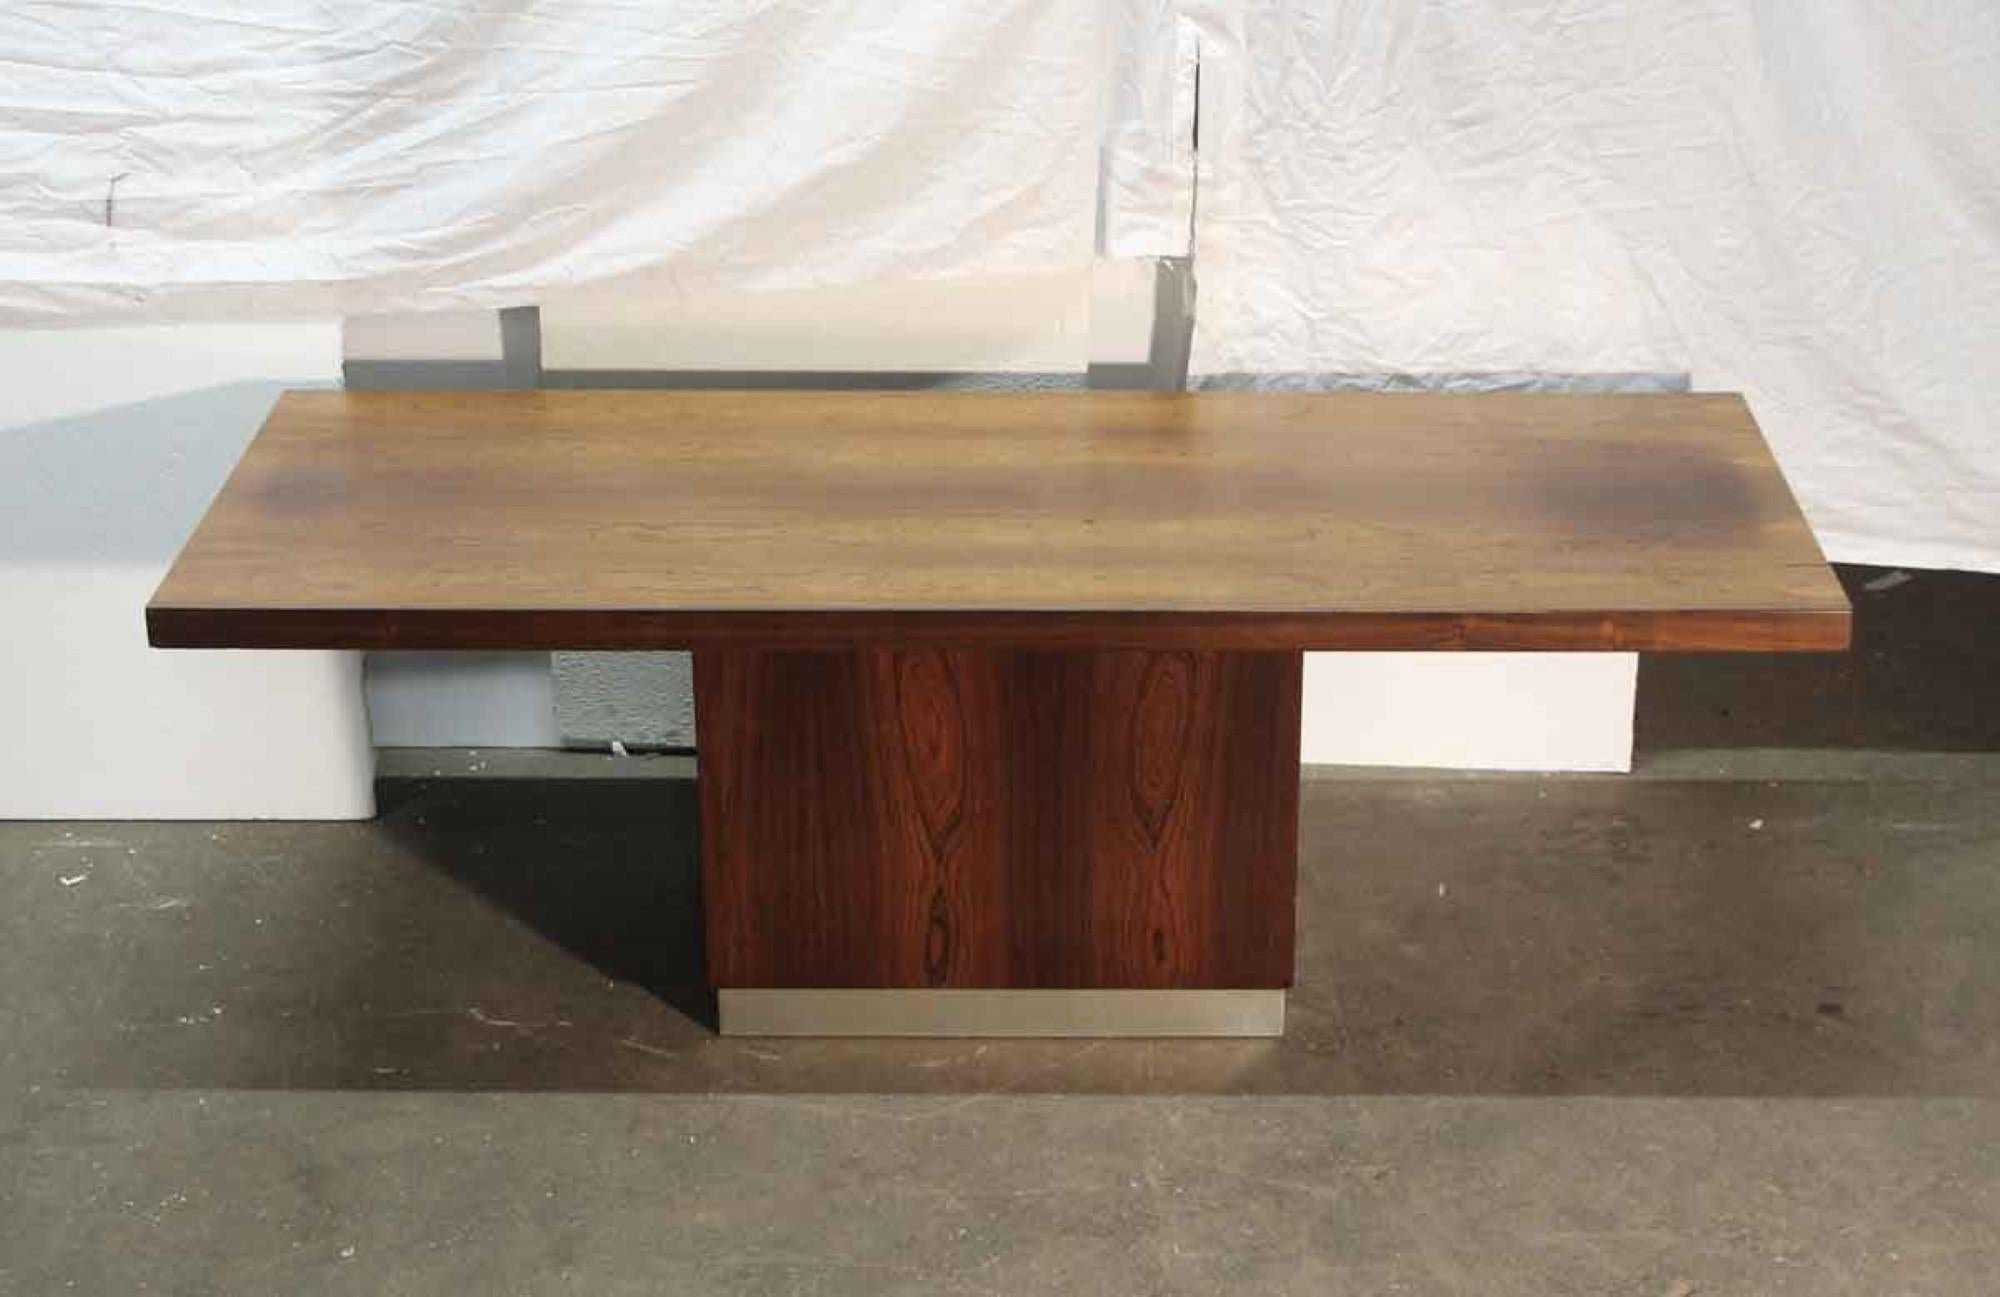 Sleek lines accentuate this Mid-Century Modern walnut veneer coffee table with rectangular base. The wooden base includes a nickel band at the bottom giving it a unique streamlined look.